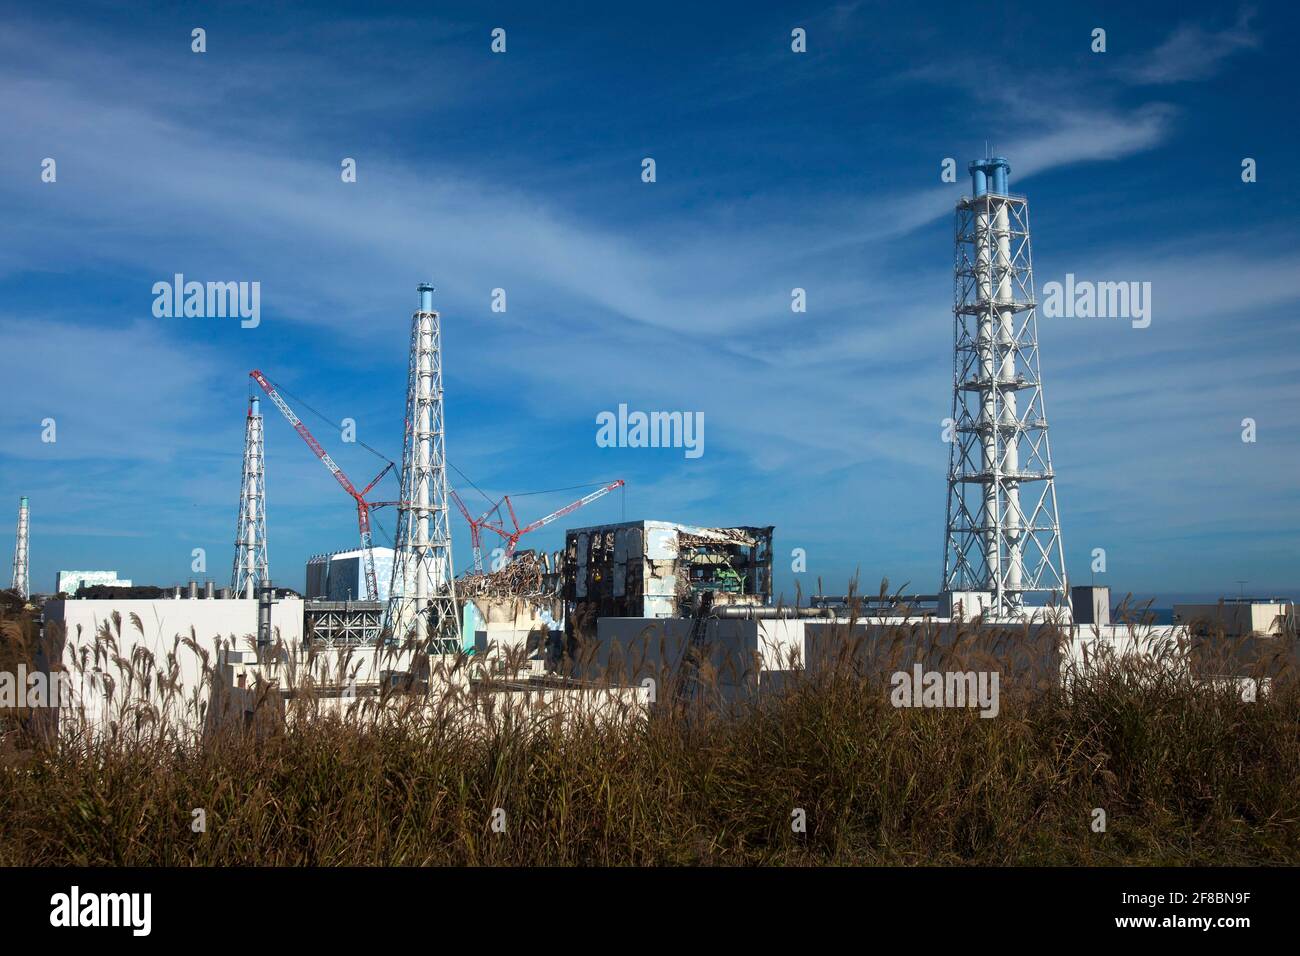 Fukushima. 13th Apr, 2021. File photo taken on Nov. 12, 2011 shows the exterior of Fukushima Daiichi nuclear plant in Fukushima Prefecture, Japan. TO GO WITH XINHUA HEADLINES OF April 13, 2021 Credit: Xinhua/Alamy Live News Stock Photo